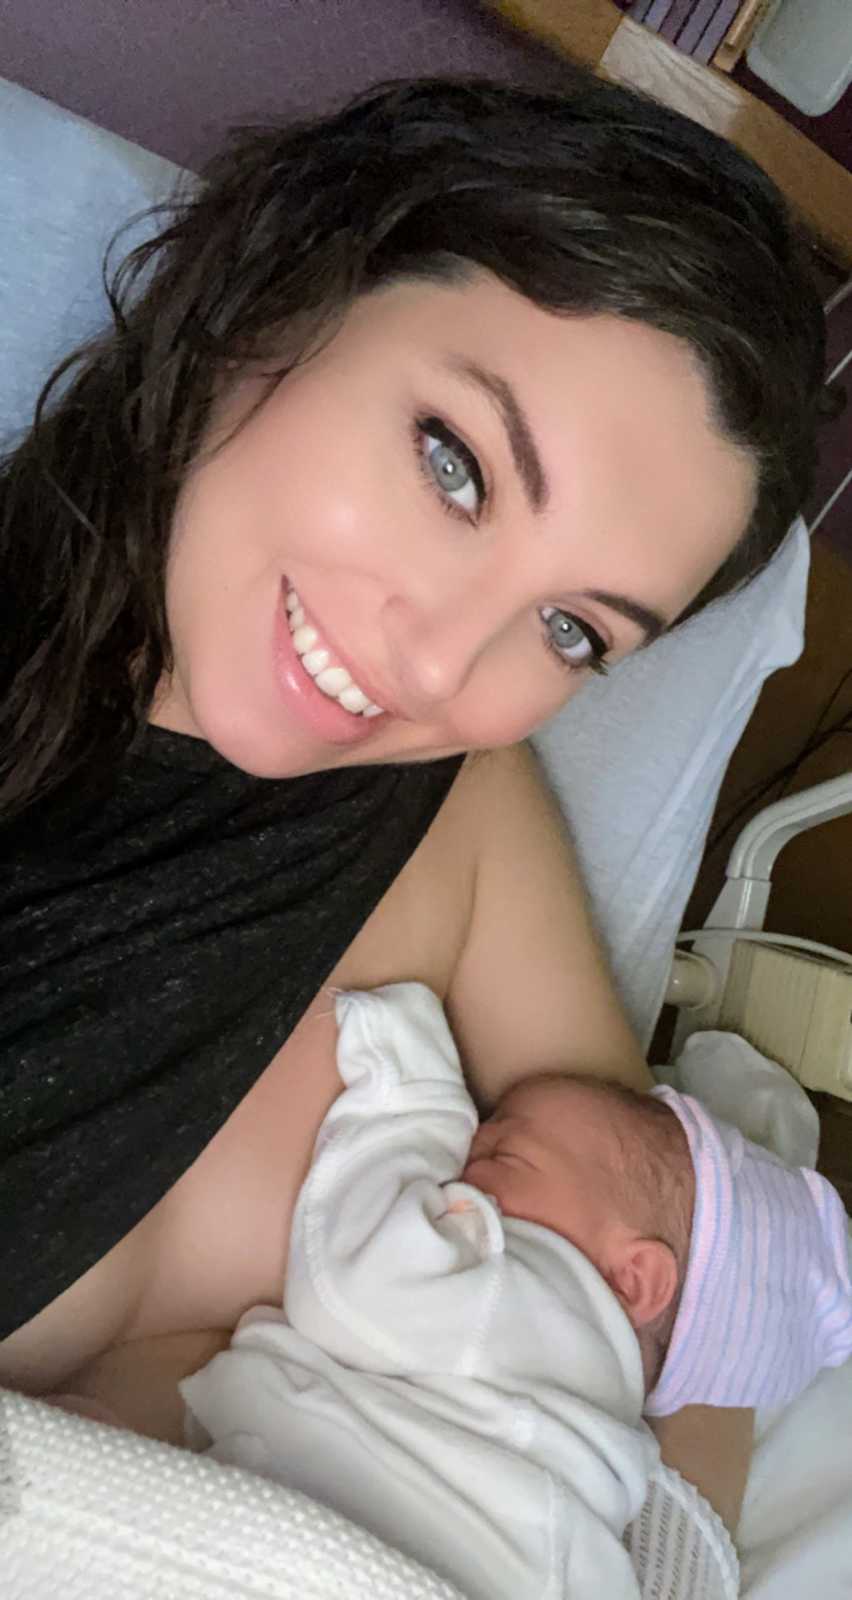 Mom takes selfie while trying to breastfeed her newborn in the hospital